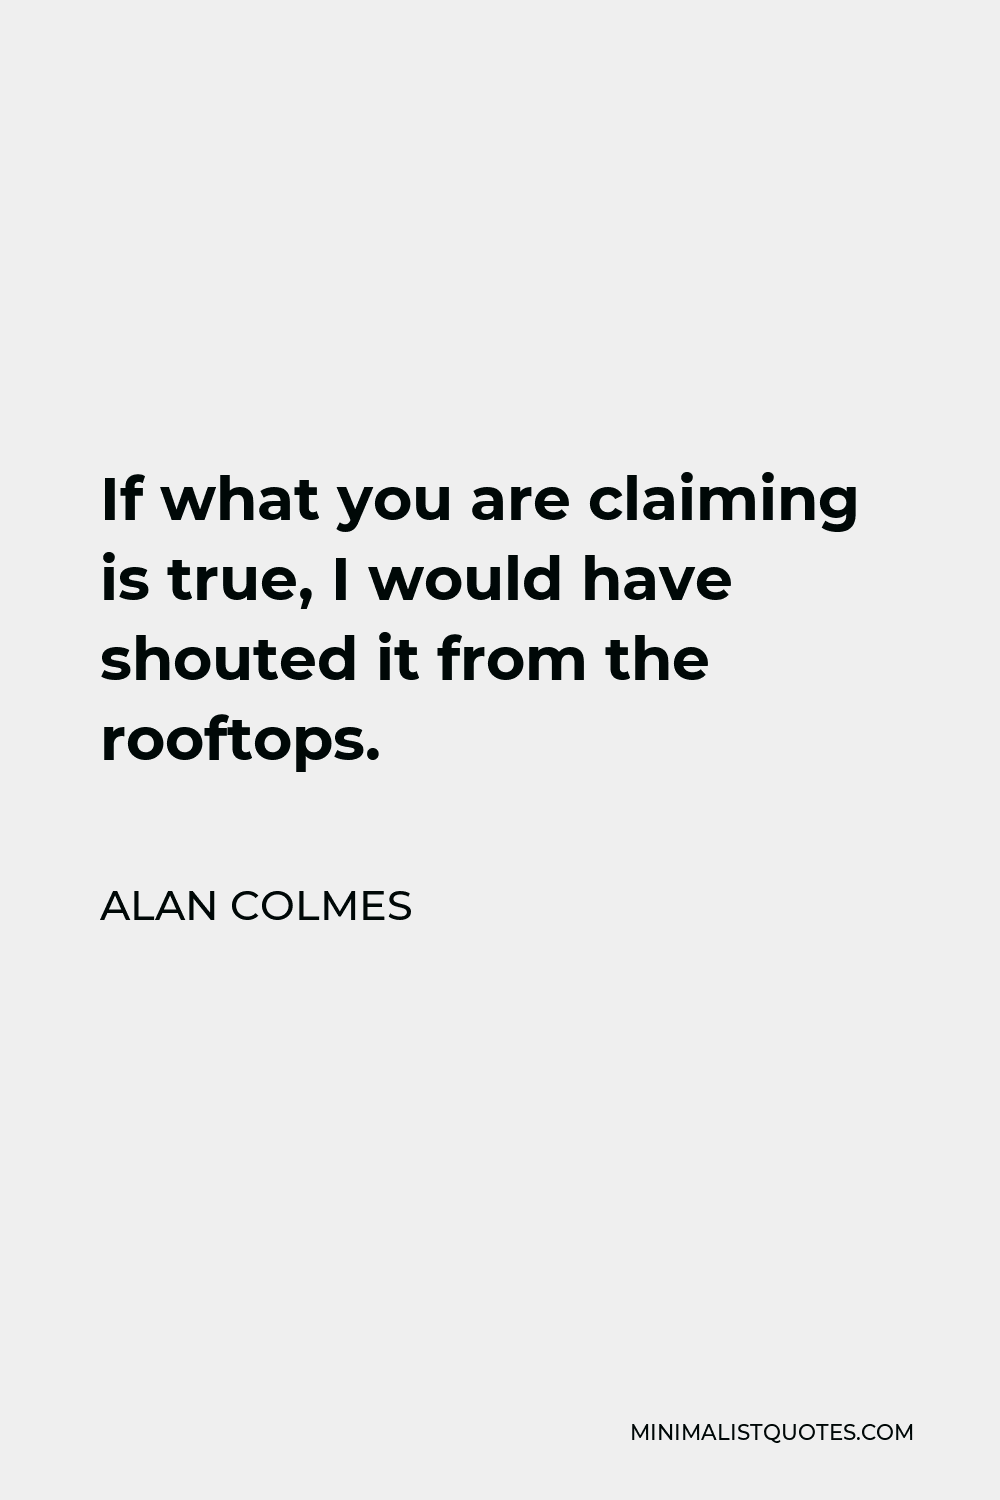 Alan Colmes Quote - If what you are claiming is true, I would have shouted it from the rooftops.